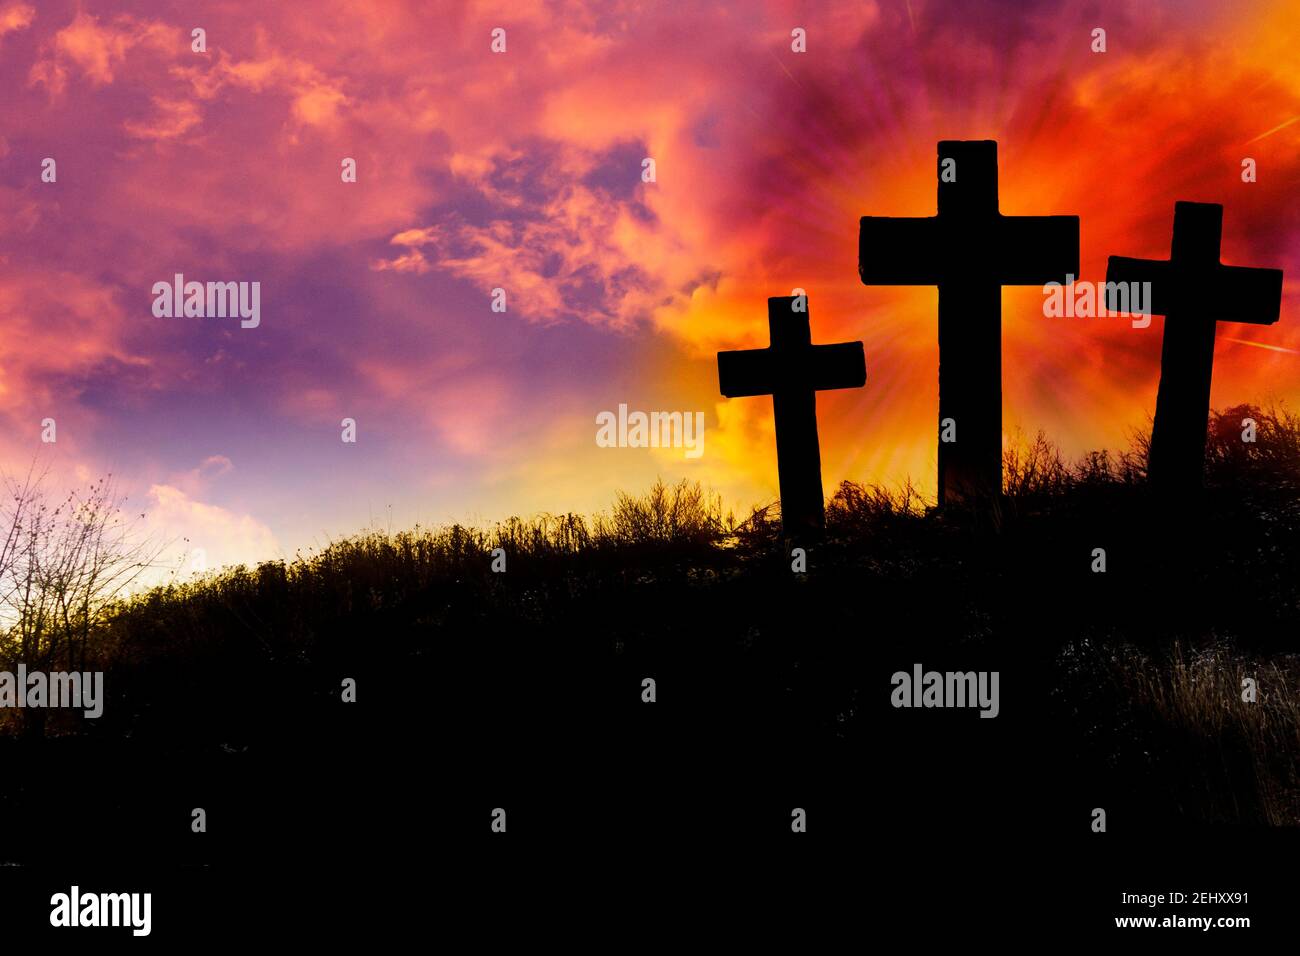 three crosses on the hill, symbols of the crucifixion of Jesus Christ Stock Photo